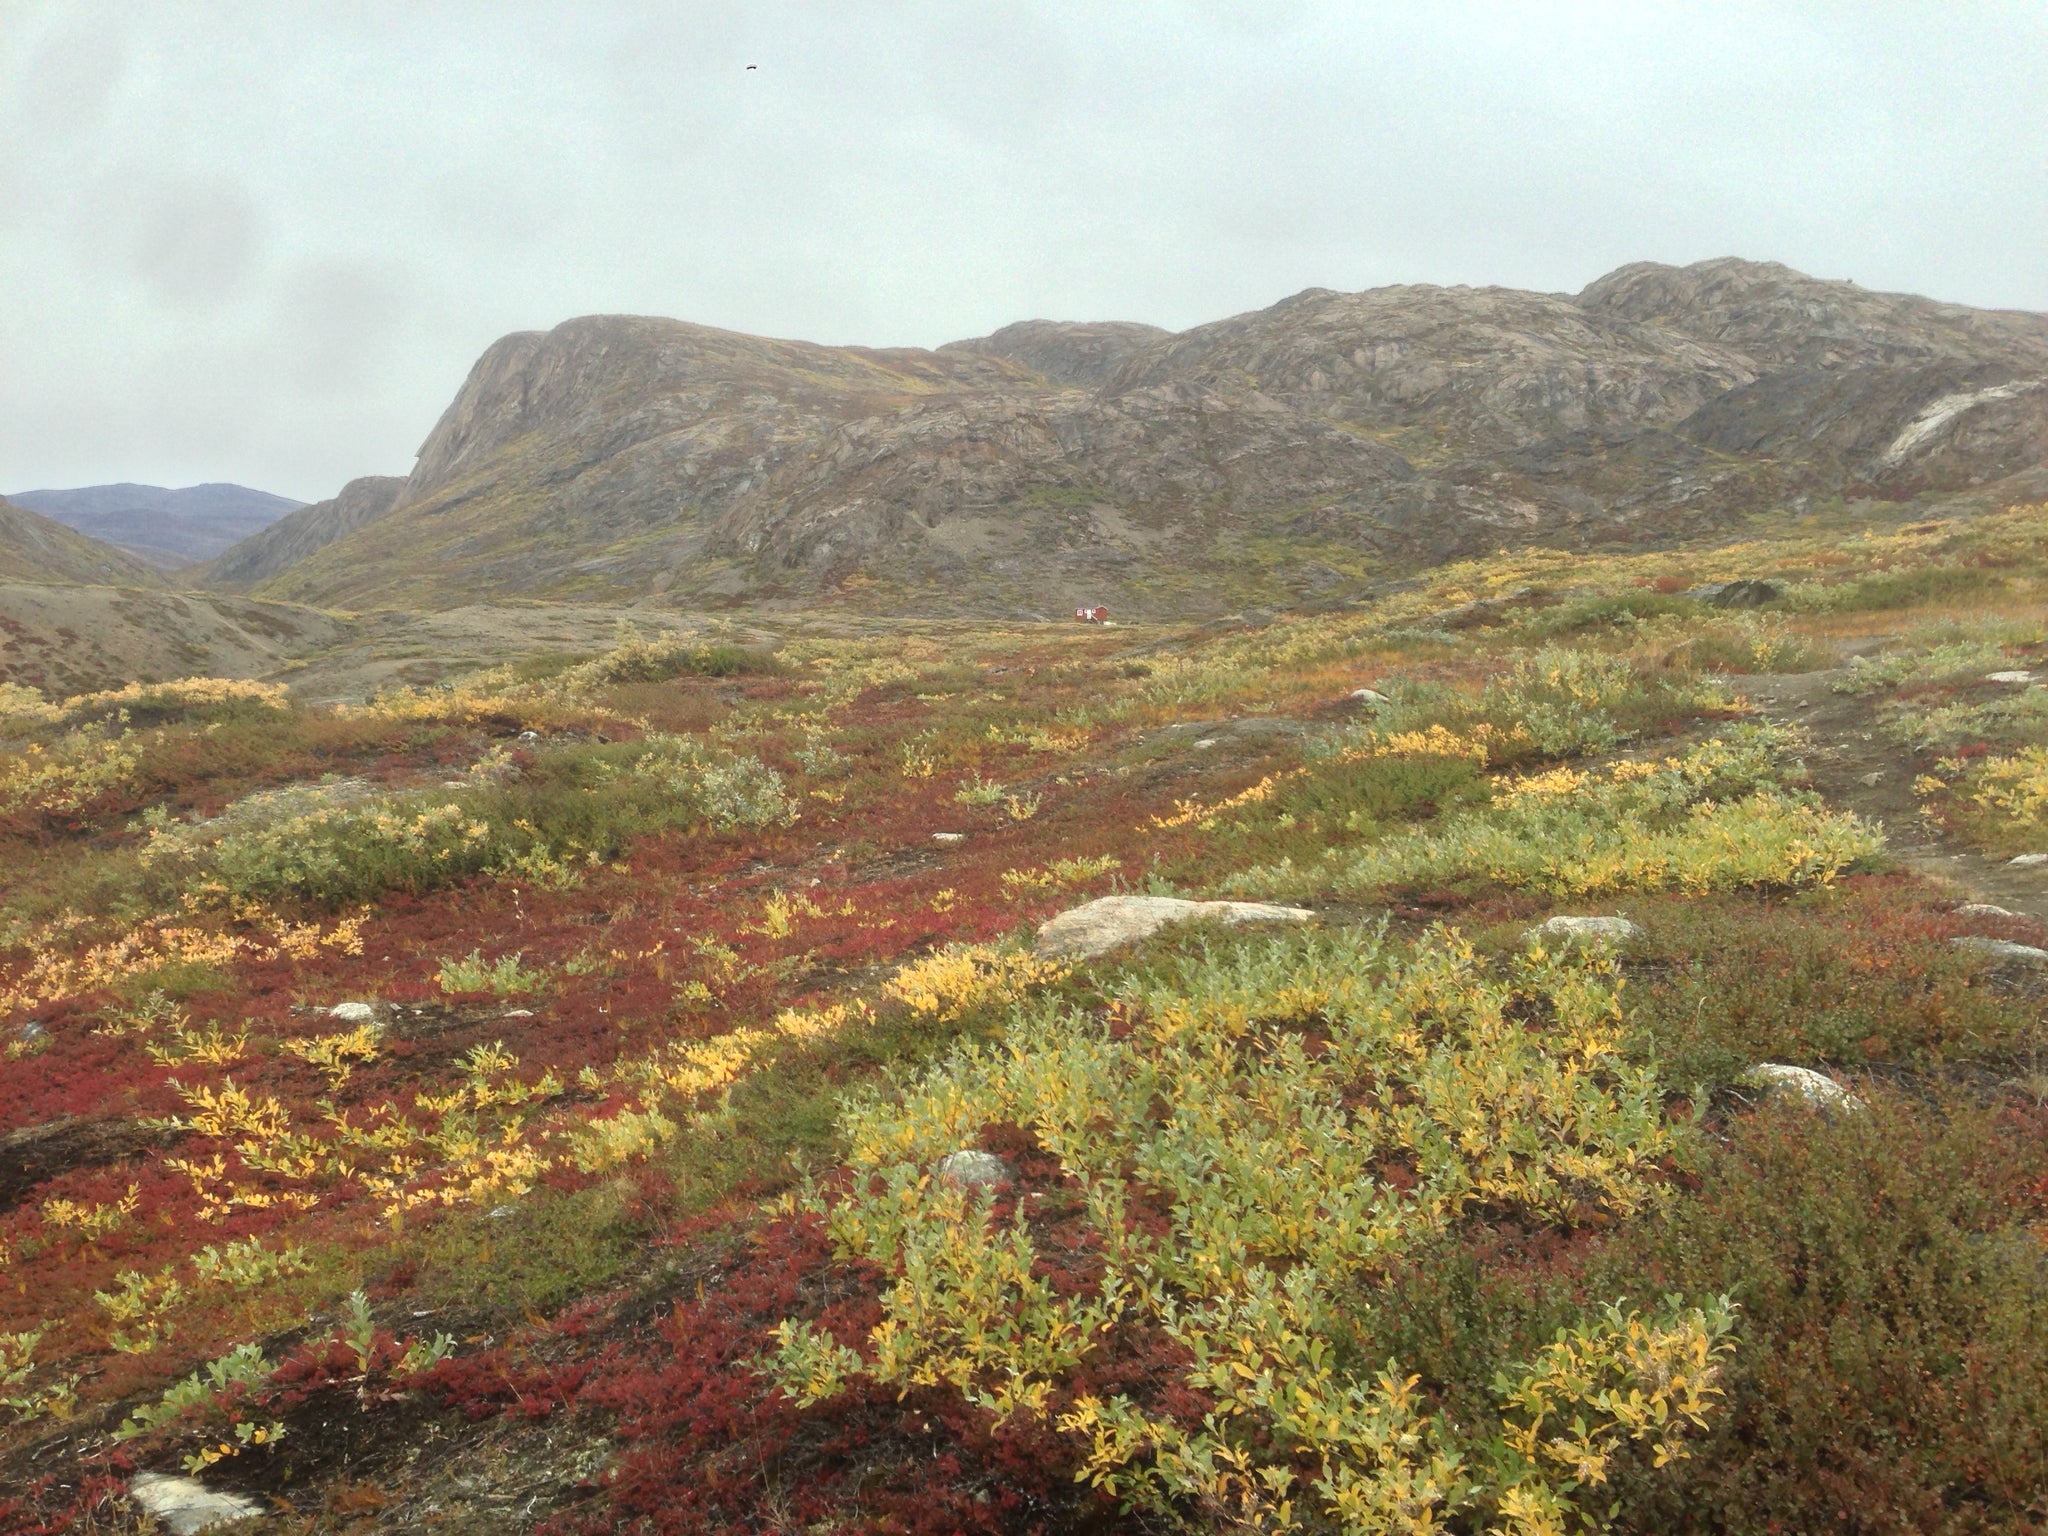 Approaching Eqalugaarniarfik Hut (At center, up against the mountain), Greenland (Arctic Circle Trail)